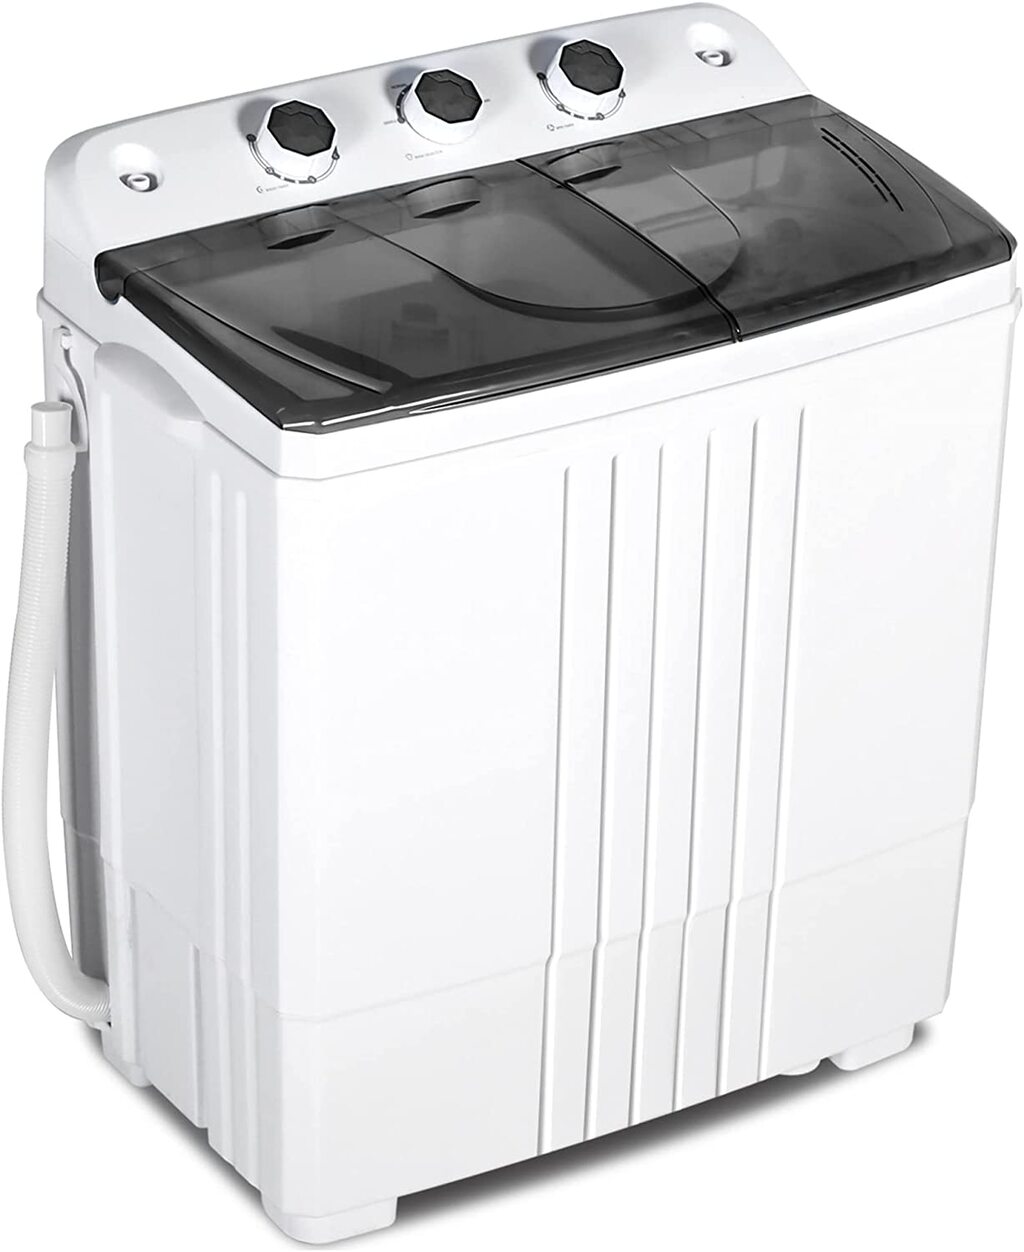 STHOUYN Portable Washer Dryer Combo